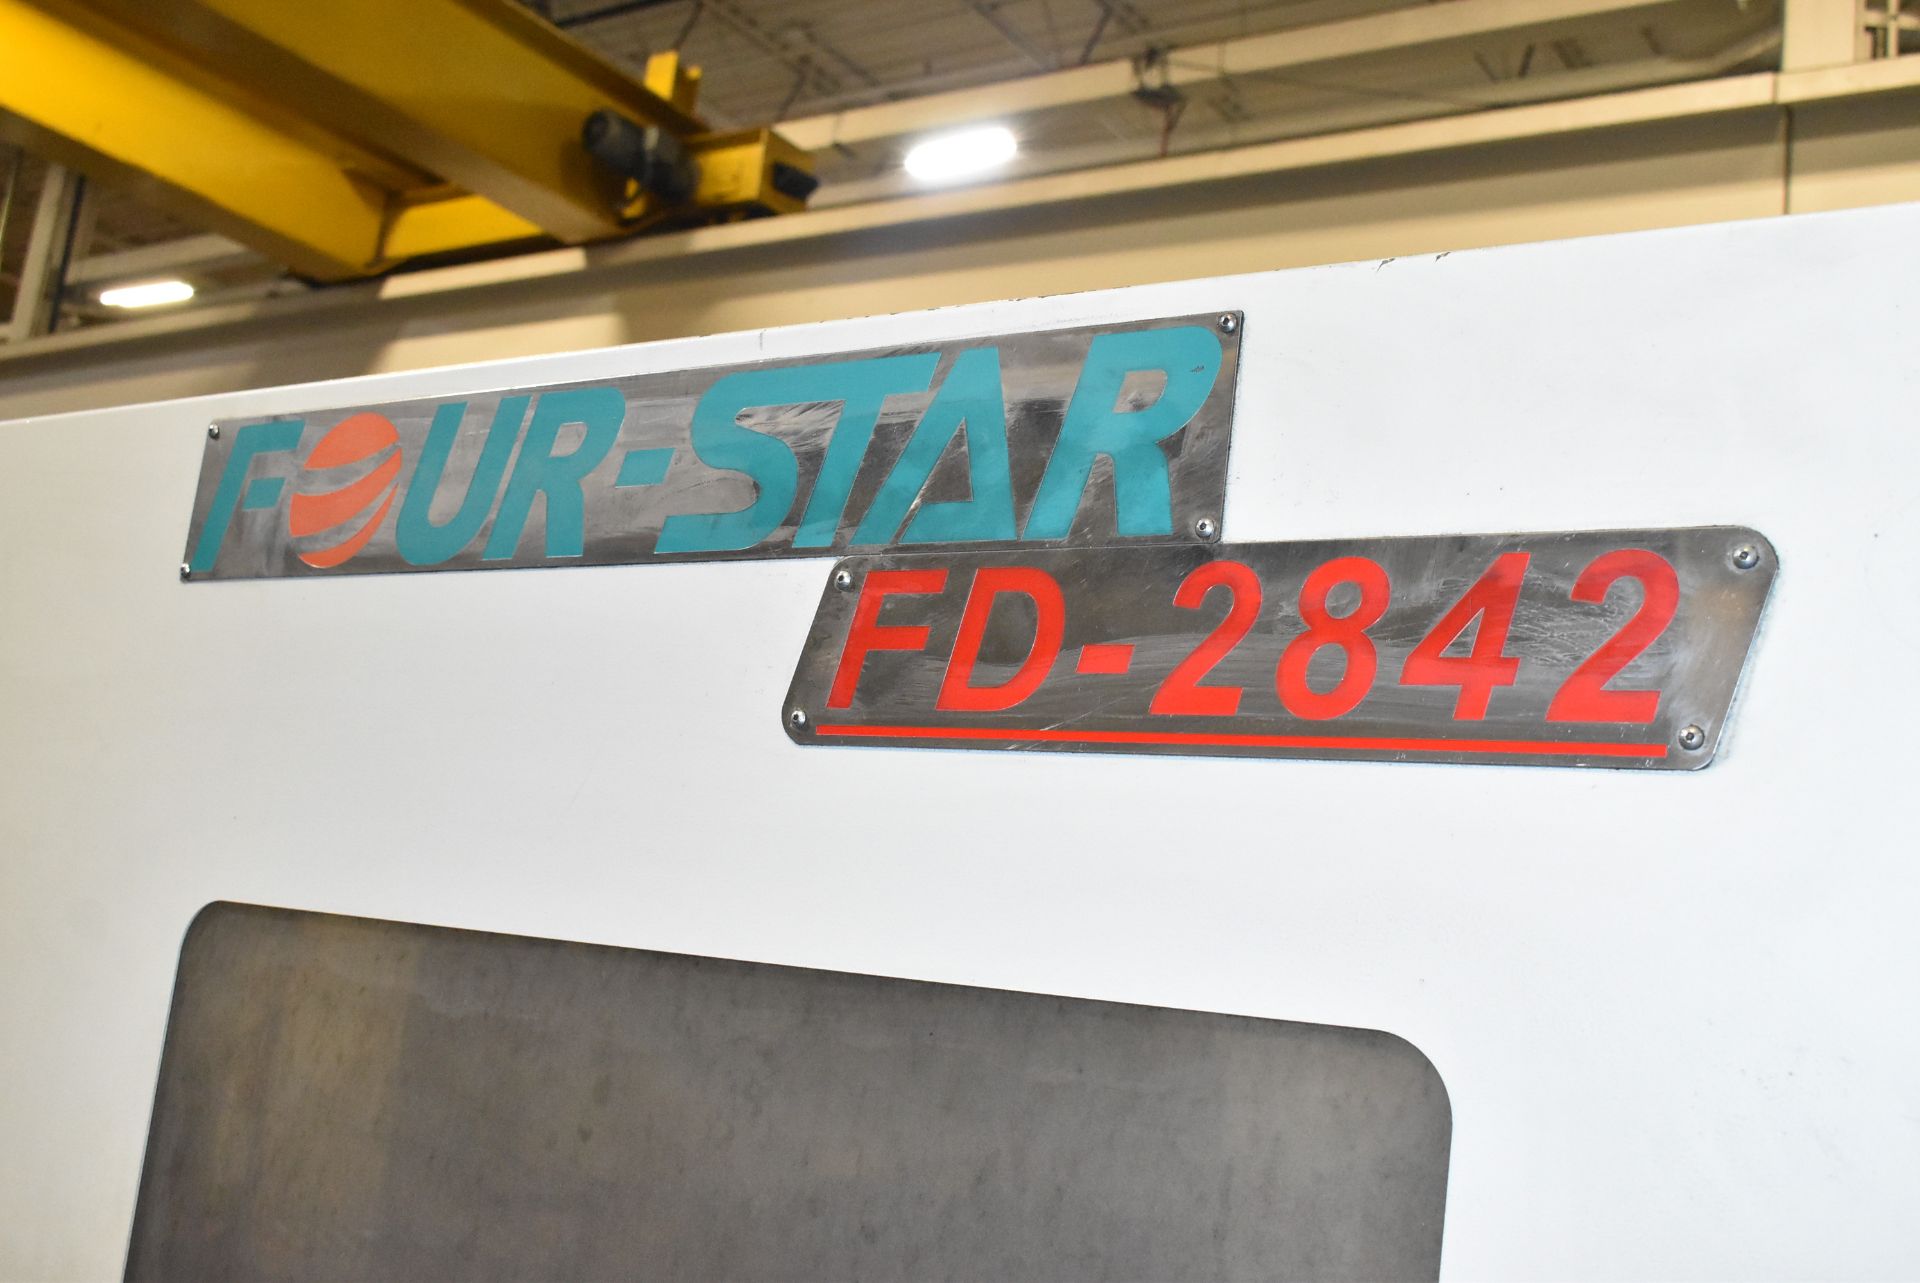 FOUR STAR (2014) FD-2842/5F 5-AXIS BRIDGE-TYPE CNC VERTICAL MACHINING CENTER WITH FANUC SERIES OI-MD - Image 10 of 12